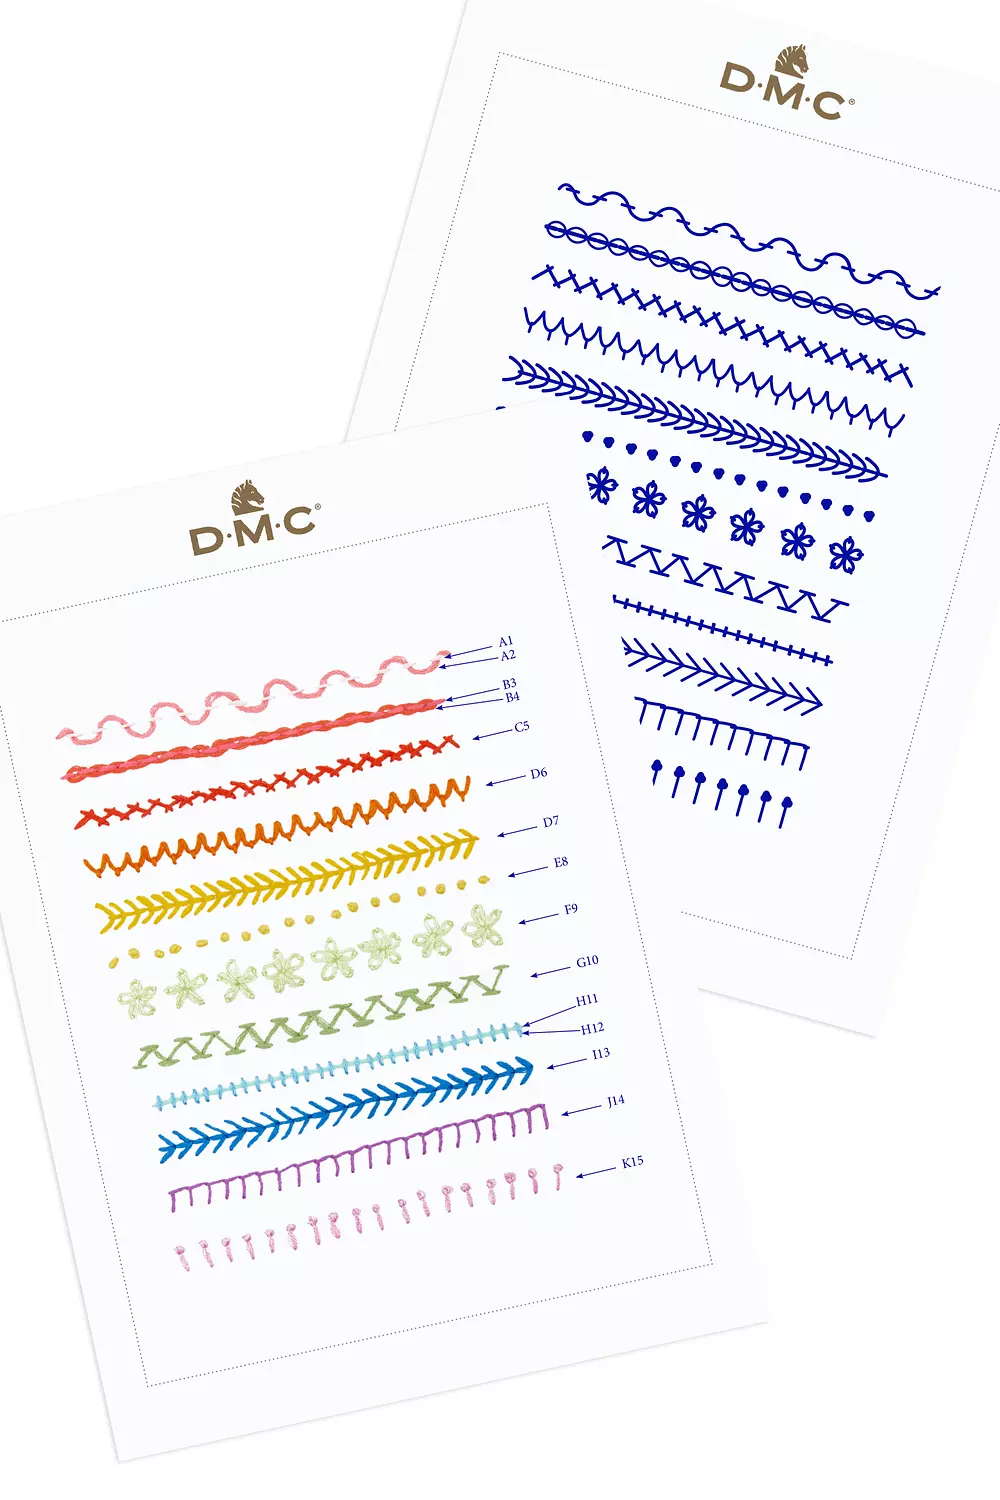 DMC Embroidery Floss/Cross Stitch Pattern Databases that talk to each  other. Very niche but I needed this and it took forever to compileI  wanted to share it in case any other crafters